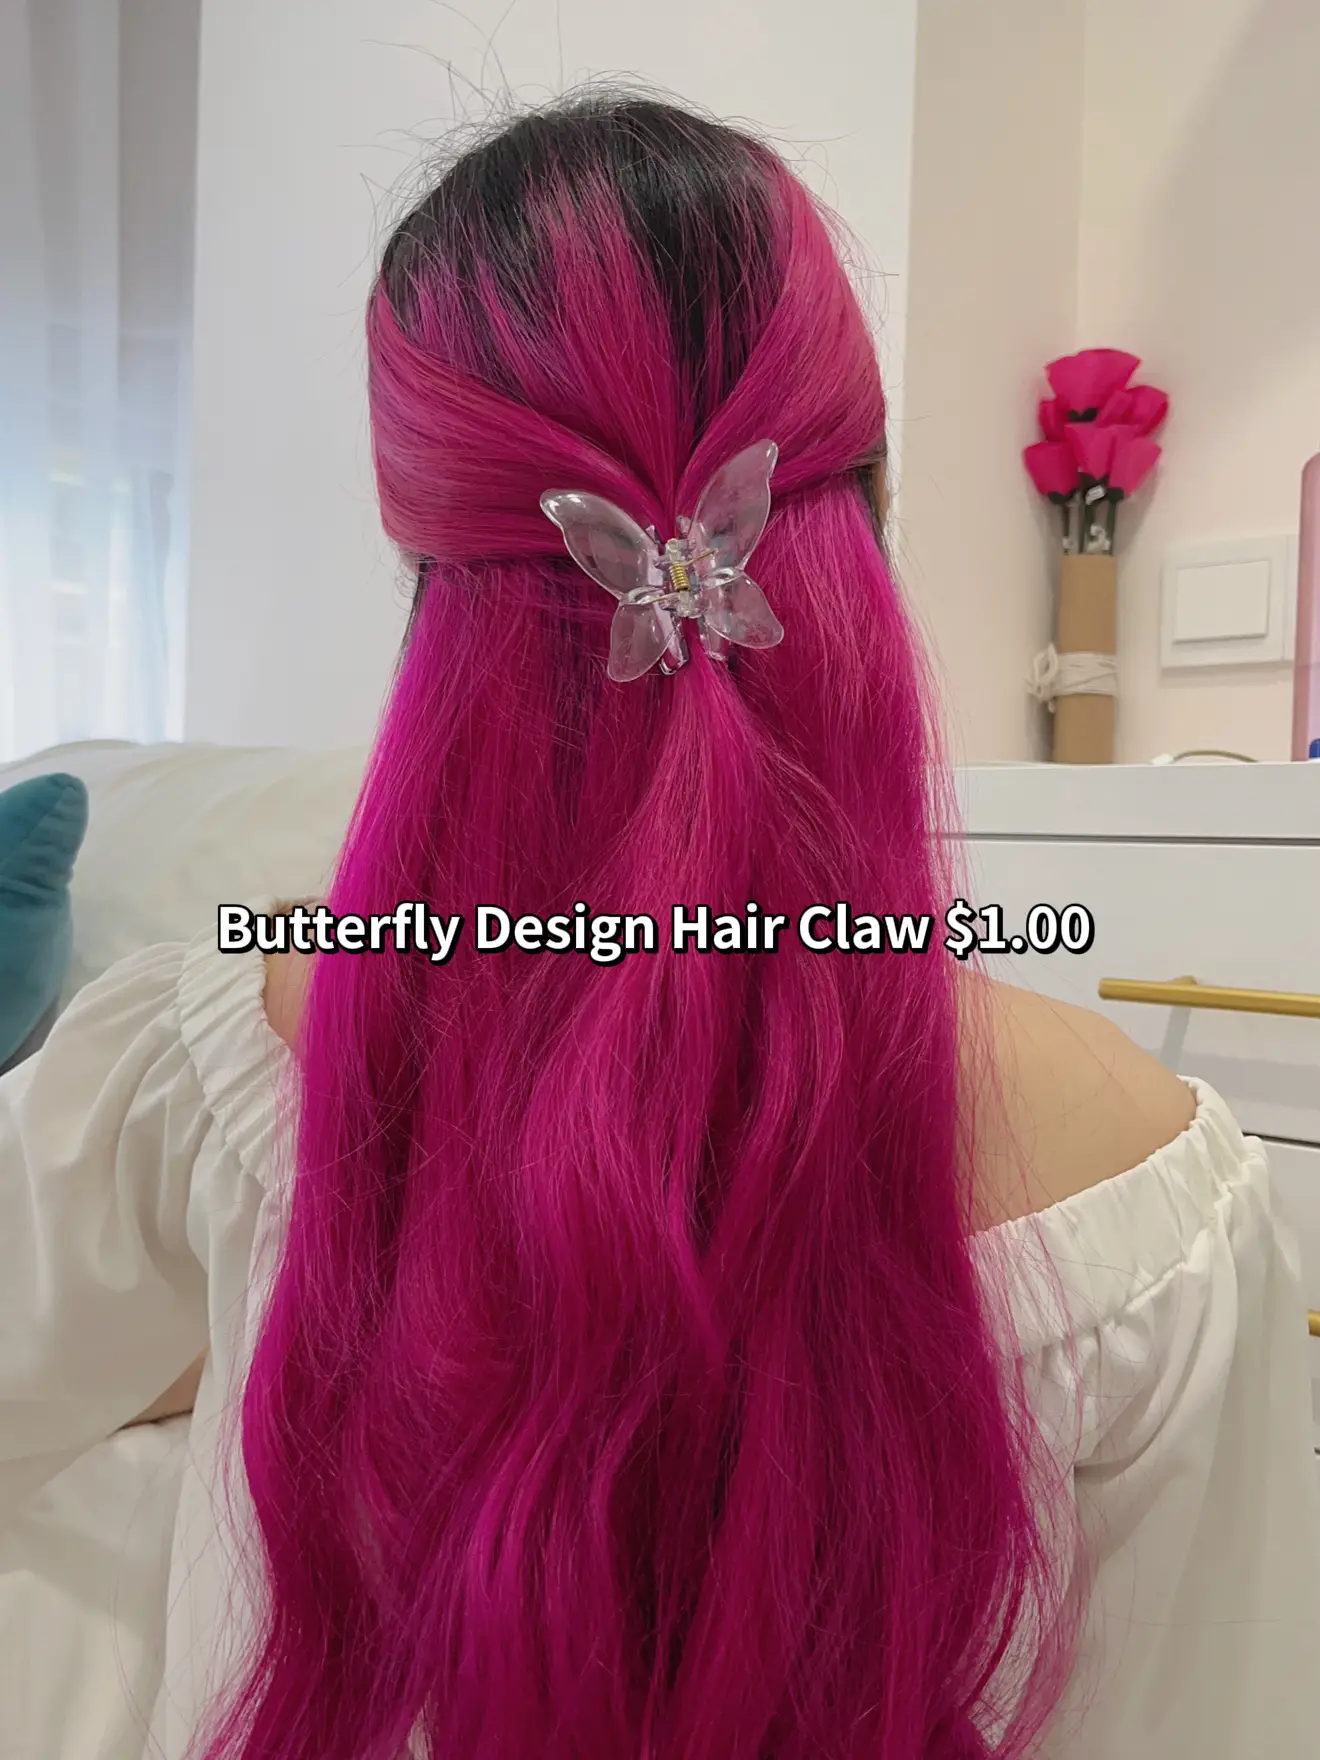 HURRY/3 DAYS ONLY) GET TWICE SQUARE NEW FREE HAIR NOW! 🤩🥰 ALL